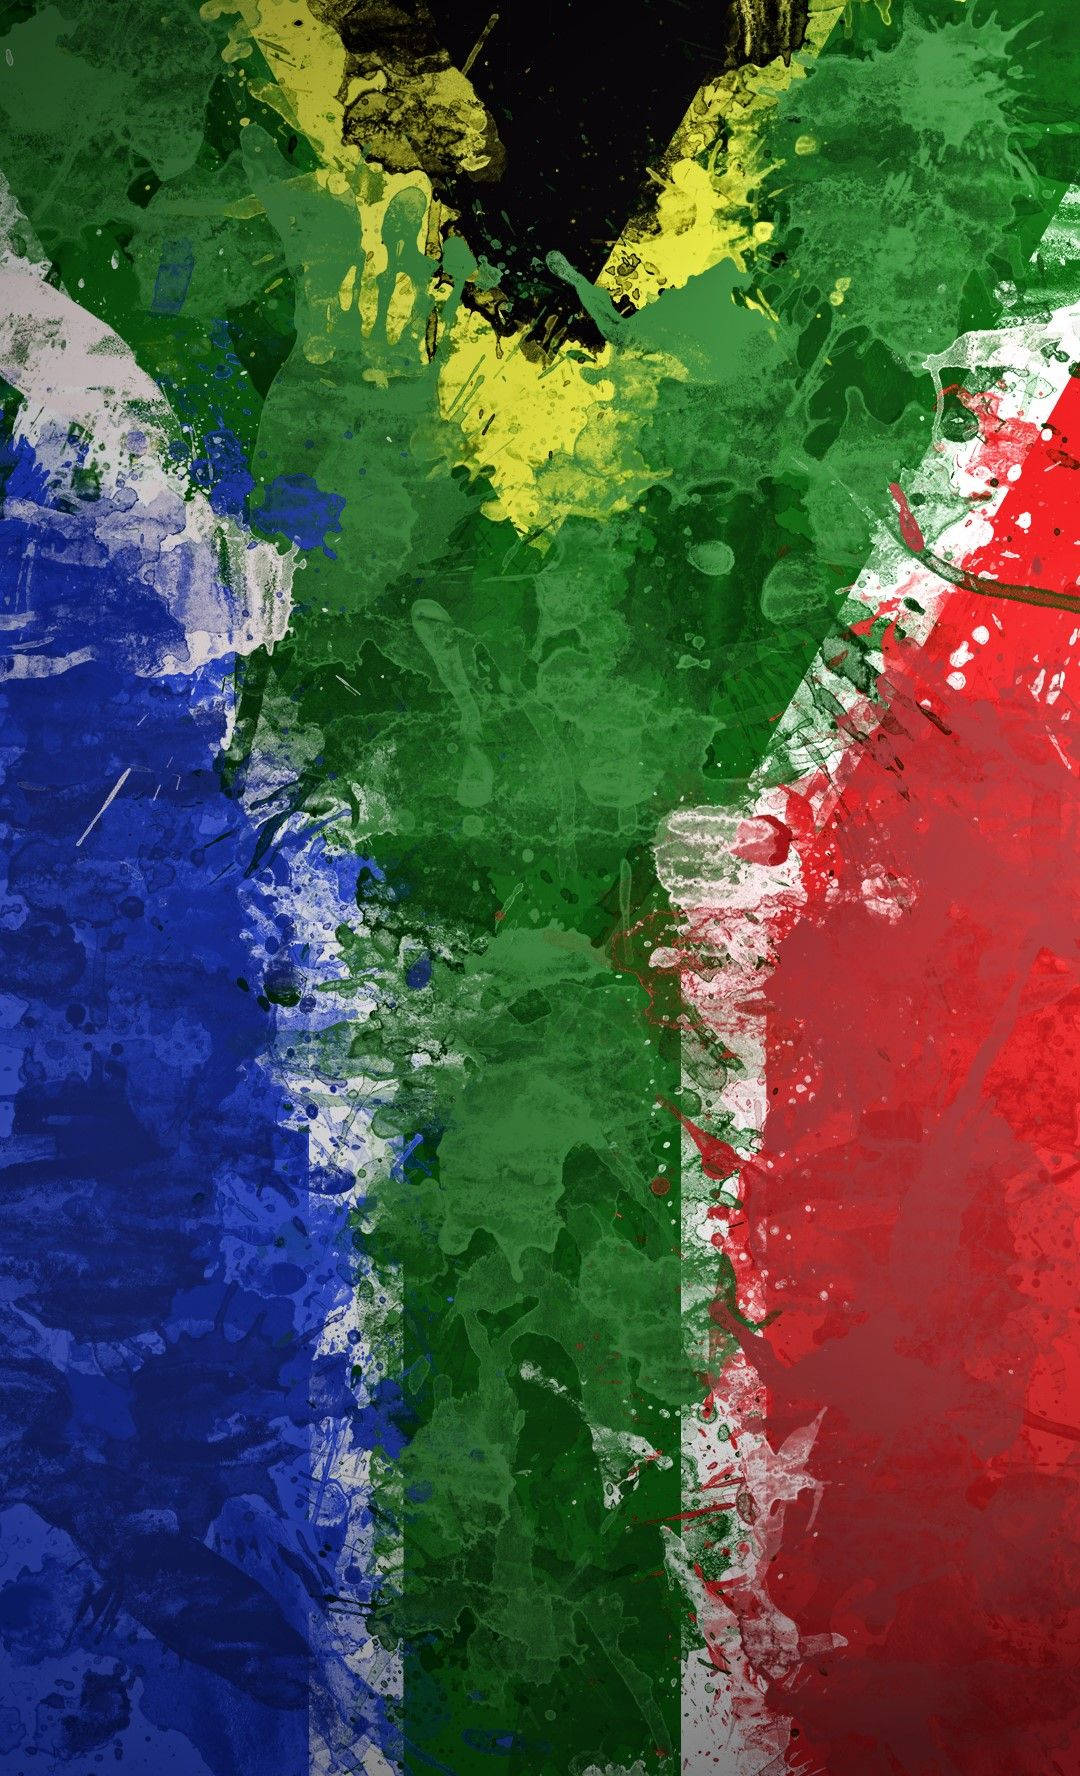 Painted Flag Africa Iphone Wallpaper